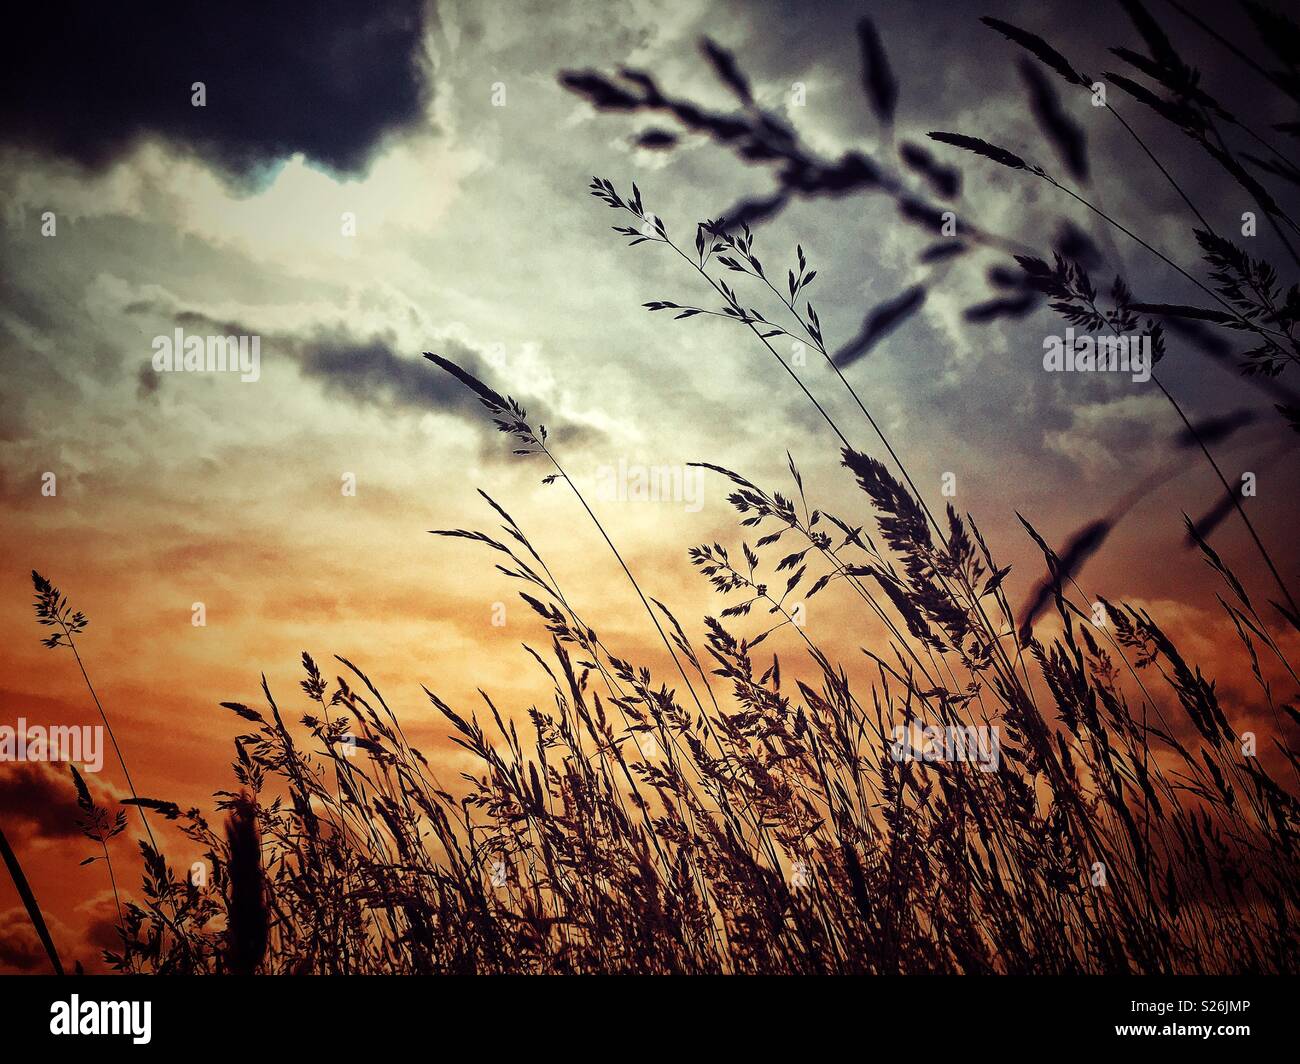 Grass silhouette against a dramatic sky. Stock Photo